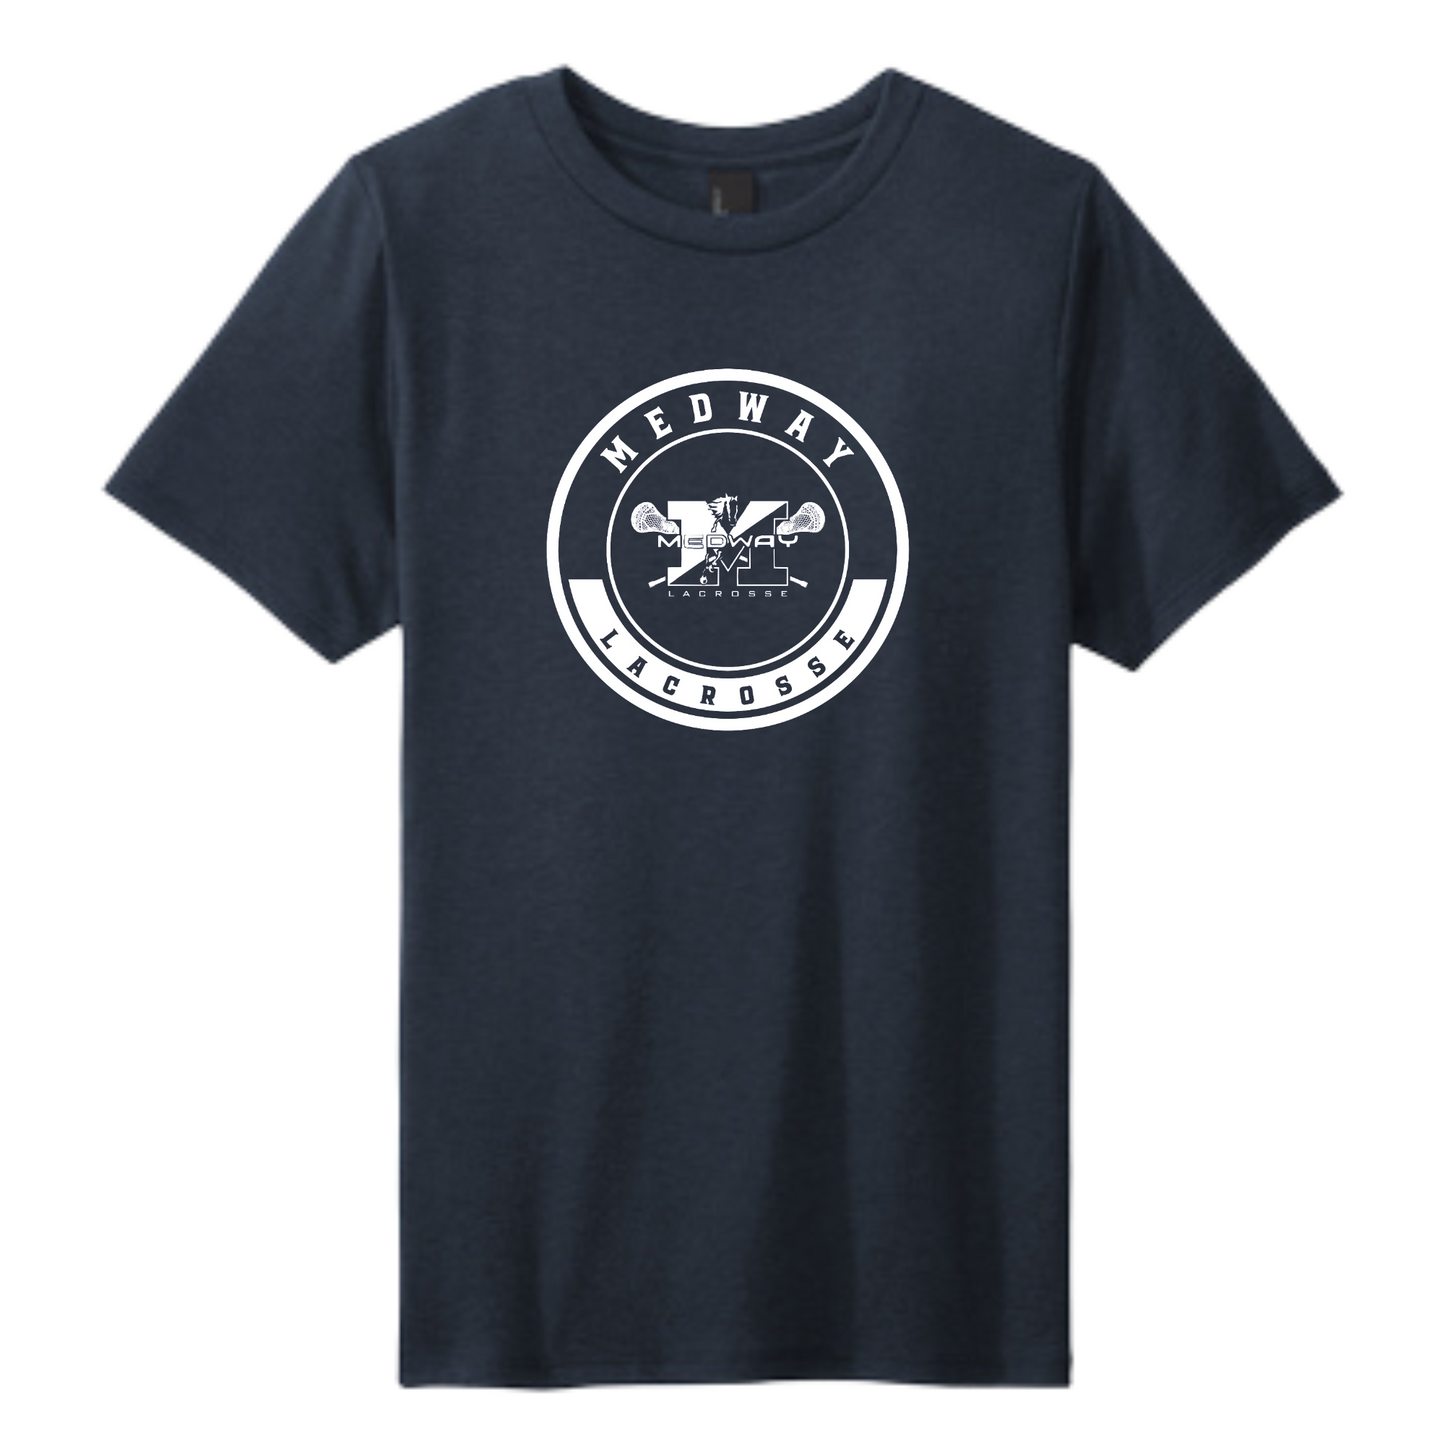 MEDWAY YOUTH LACROSSE CIRCLE LOGO YOUTH TEE - NAVY